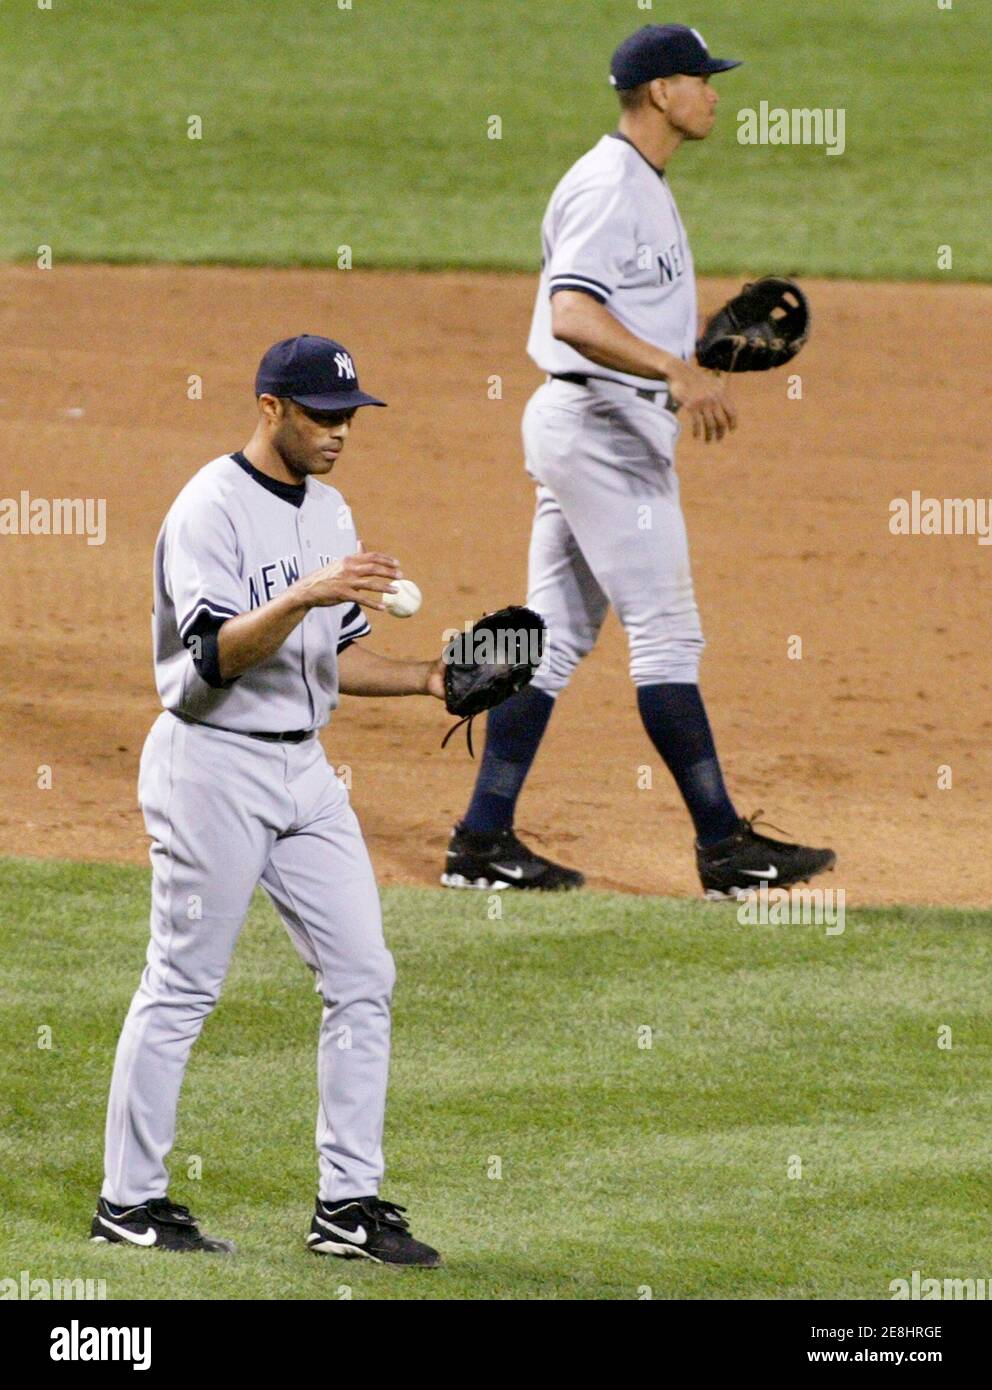 New York Yankees relief pitcher Mariano Rivera (L) flips the baseball in the air while third baseman Alex Rodriguez walks away after Rivera gave up a bases-loaded triple to Baltimore Orioles batter Jay Payton that tied the game in the ninth inning of their MLB American League baseball game in Baltimore, Maryland September 28, 2007.     REUTERS/Gary Cameron    (UNITED STATES) Stock Photo